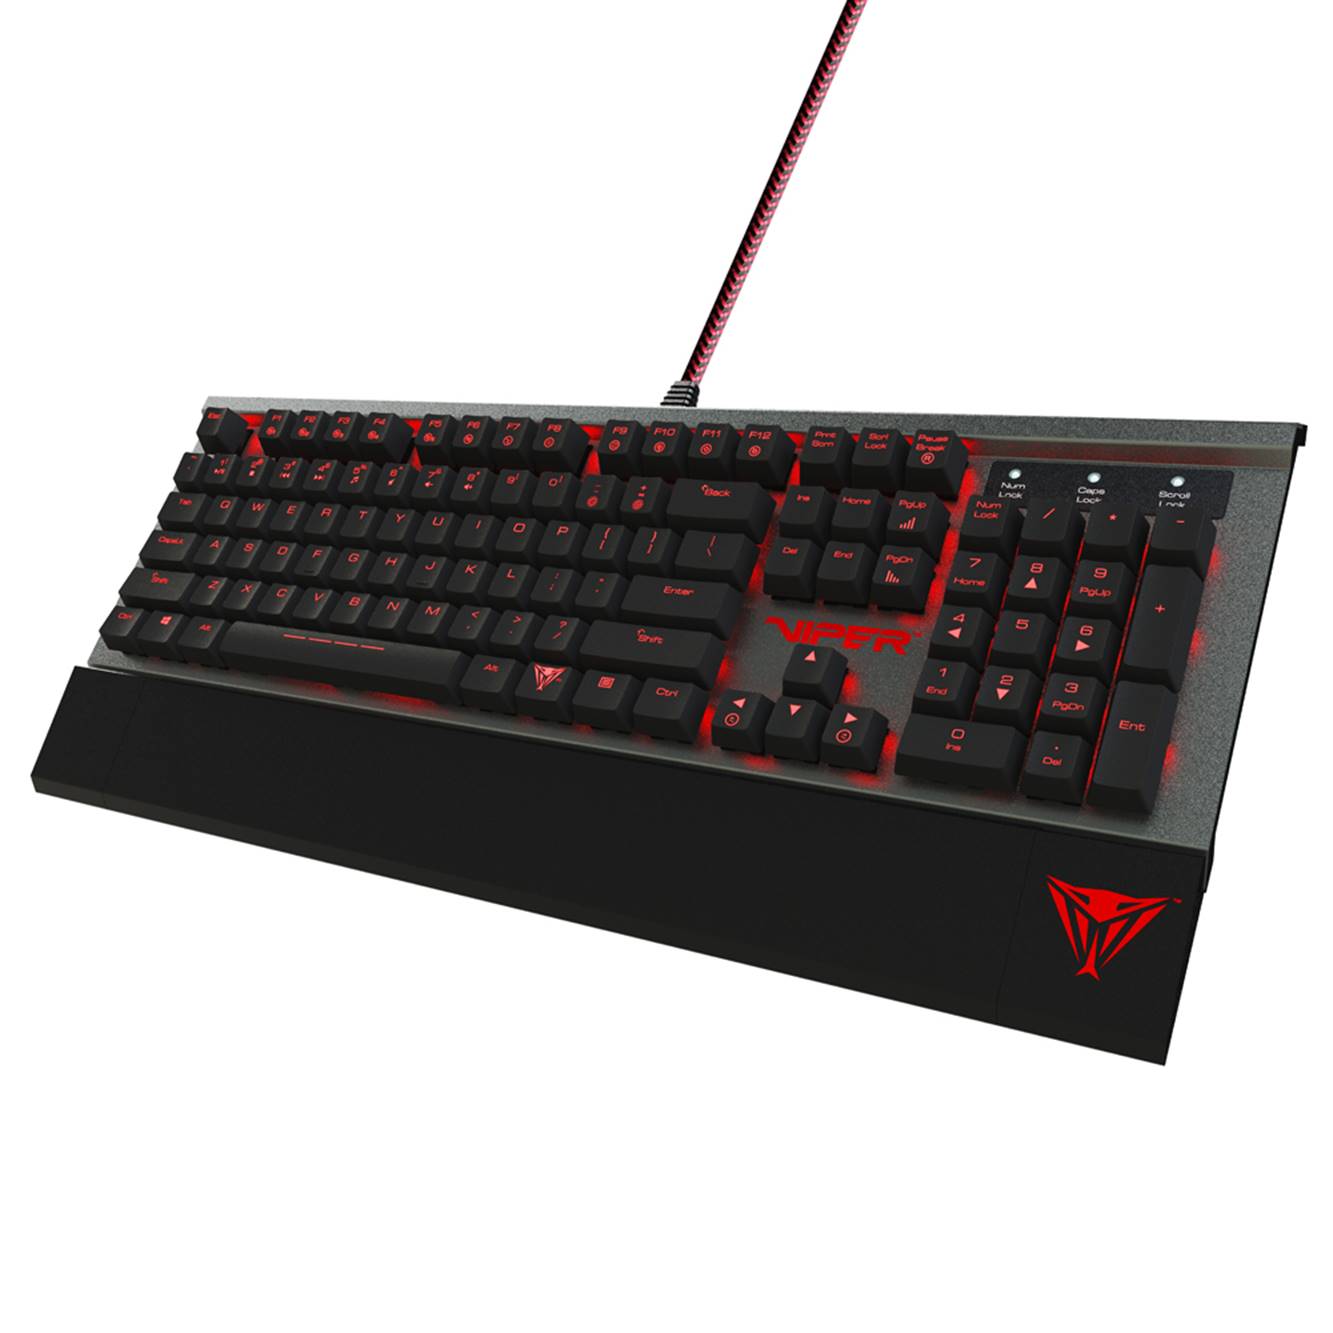 Patriot Announces V770 RGB and V730 Mechanical Gaming Keyboards